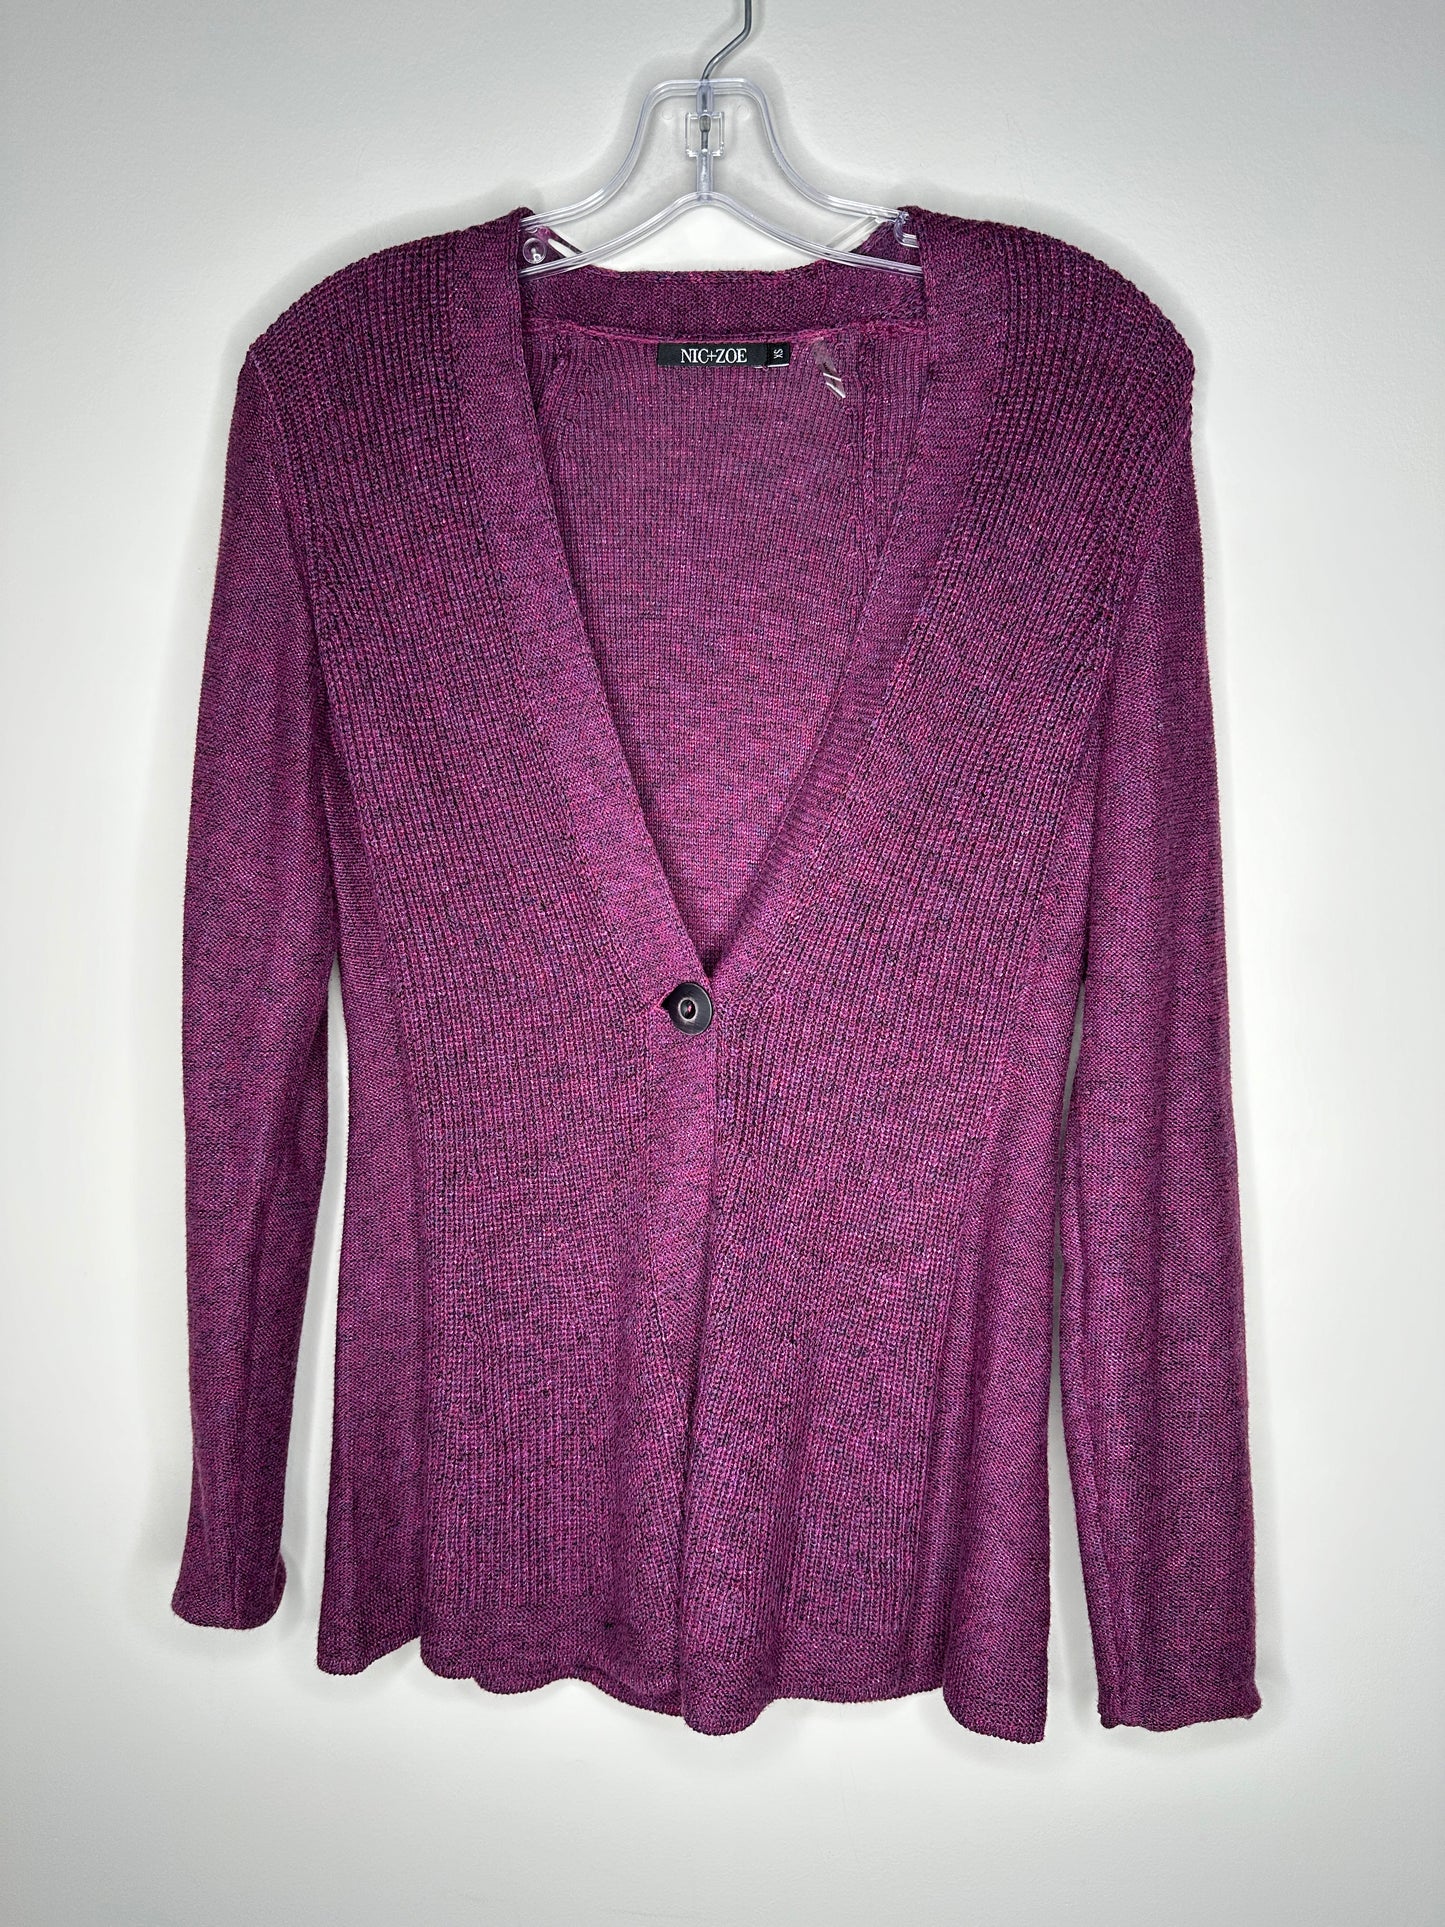 Nic+Zoe Size XS Marbled Plum Magenta Single-Button Cardigan Sweater Duster